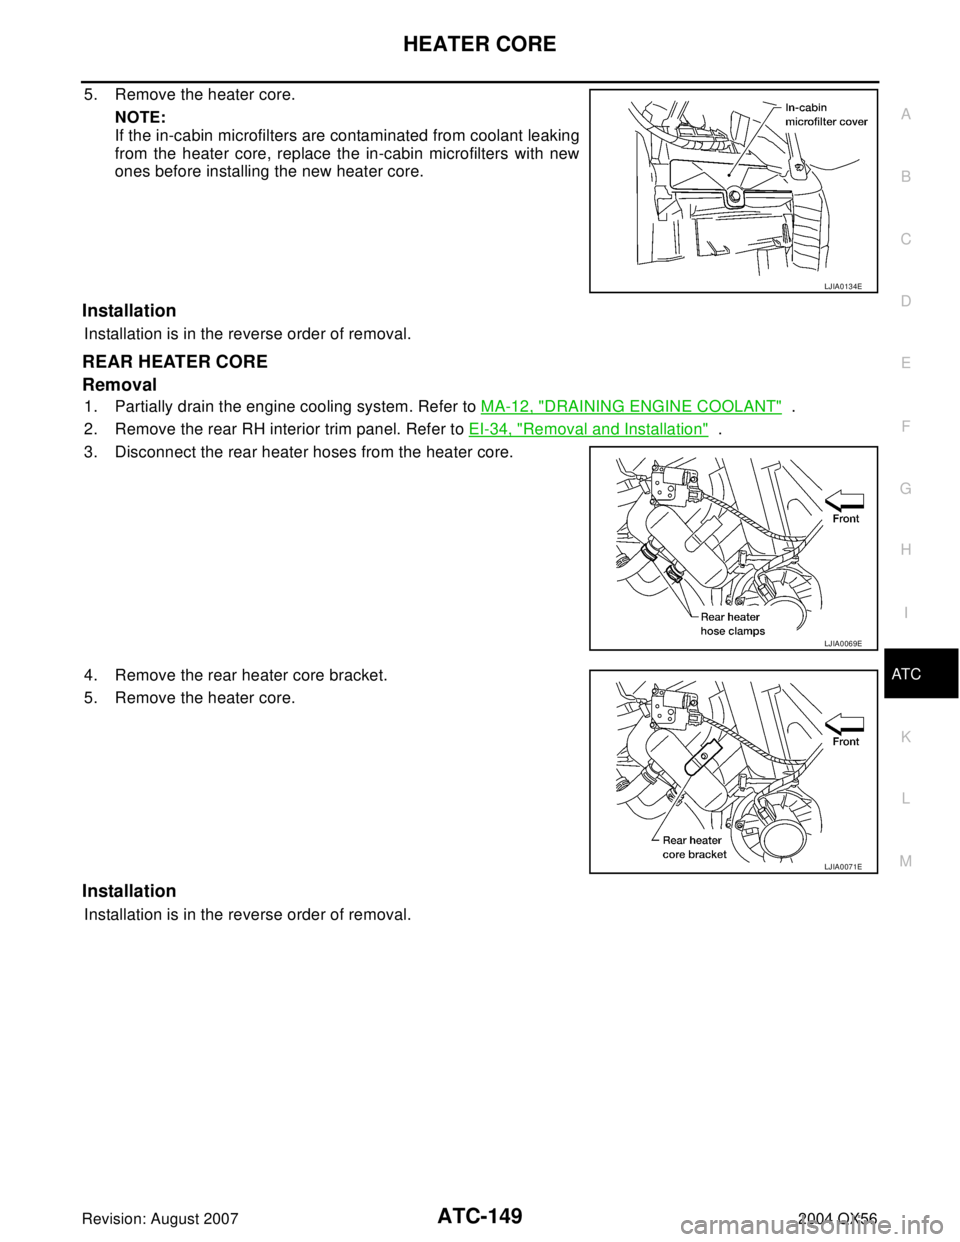 INFINITI QX56 2004  Factory Service Manual HEATER CORE
ATC-149
C
D
E
F
G
H
I
K
L
MA
B
AT C
Revision: August 20072004 QX56
5. Remove the heater core.
NOTE:
If the in-cabin microfilters are contaminated from coolant leaking
from the heater core,